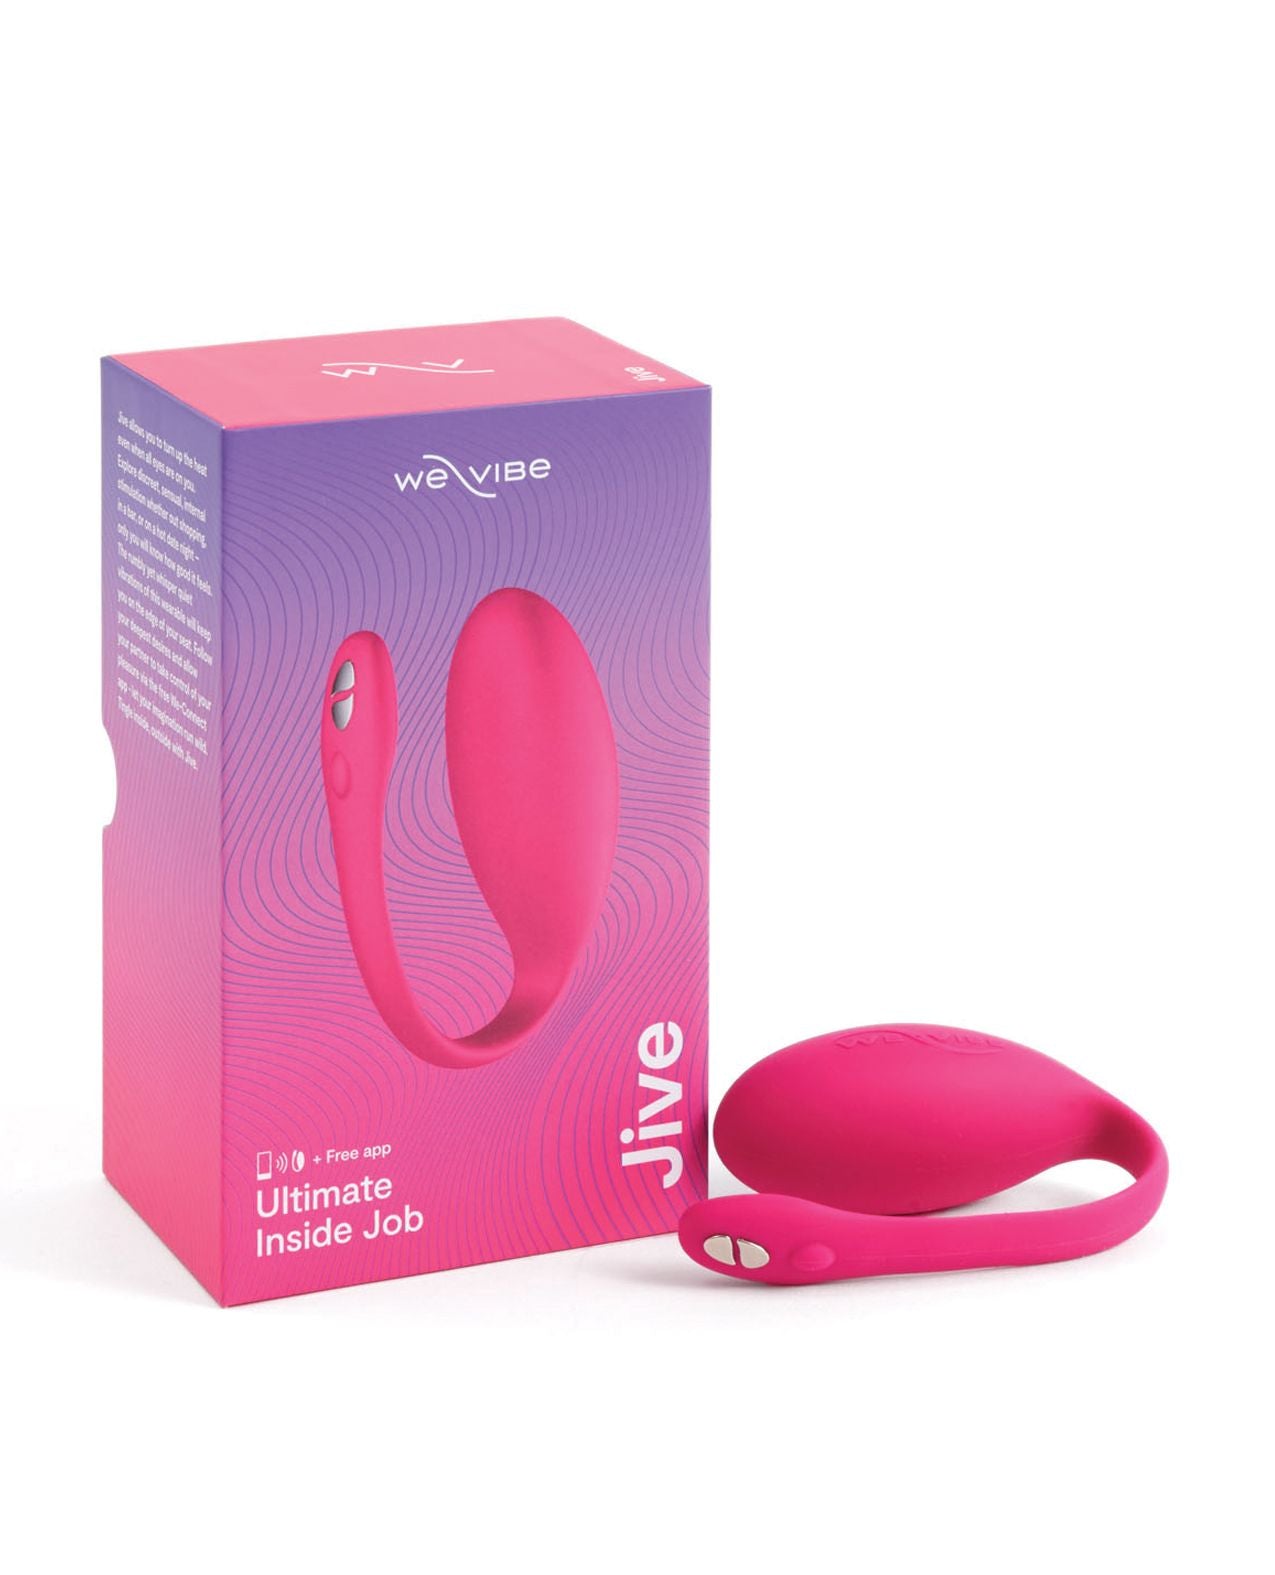 Photo of the front of the box for the Jive from We-Vibe (pink) with the toy beside it.